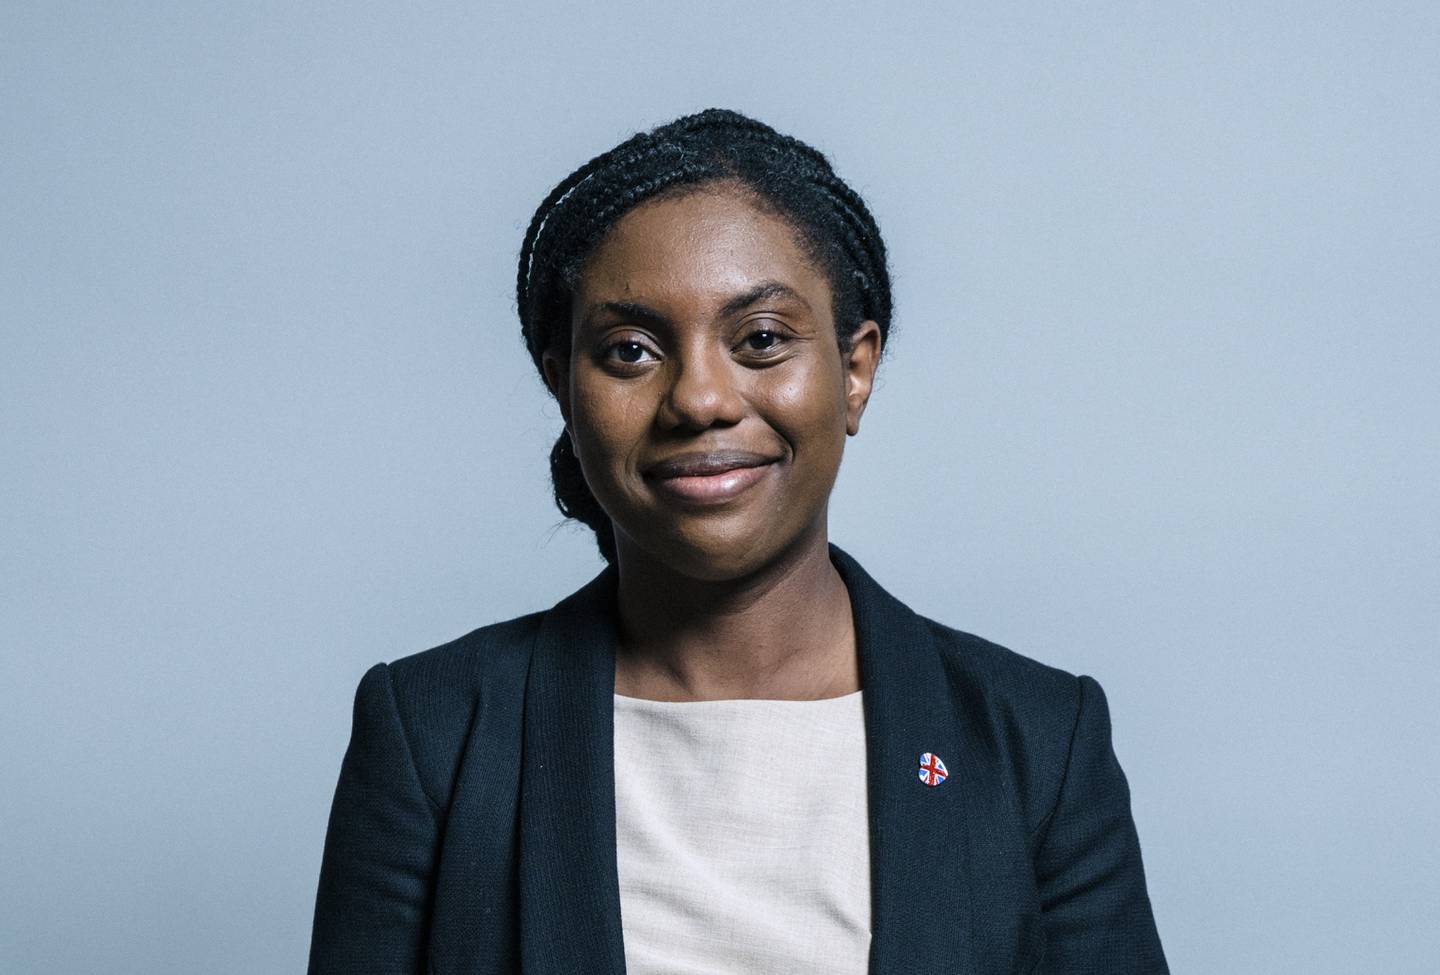 Kemi Badenoch has been Faith Minister in her most recent government role. Photo: UK Parliament